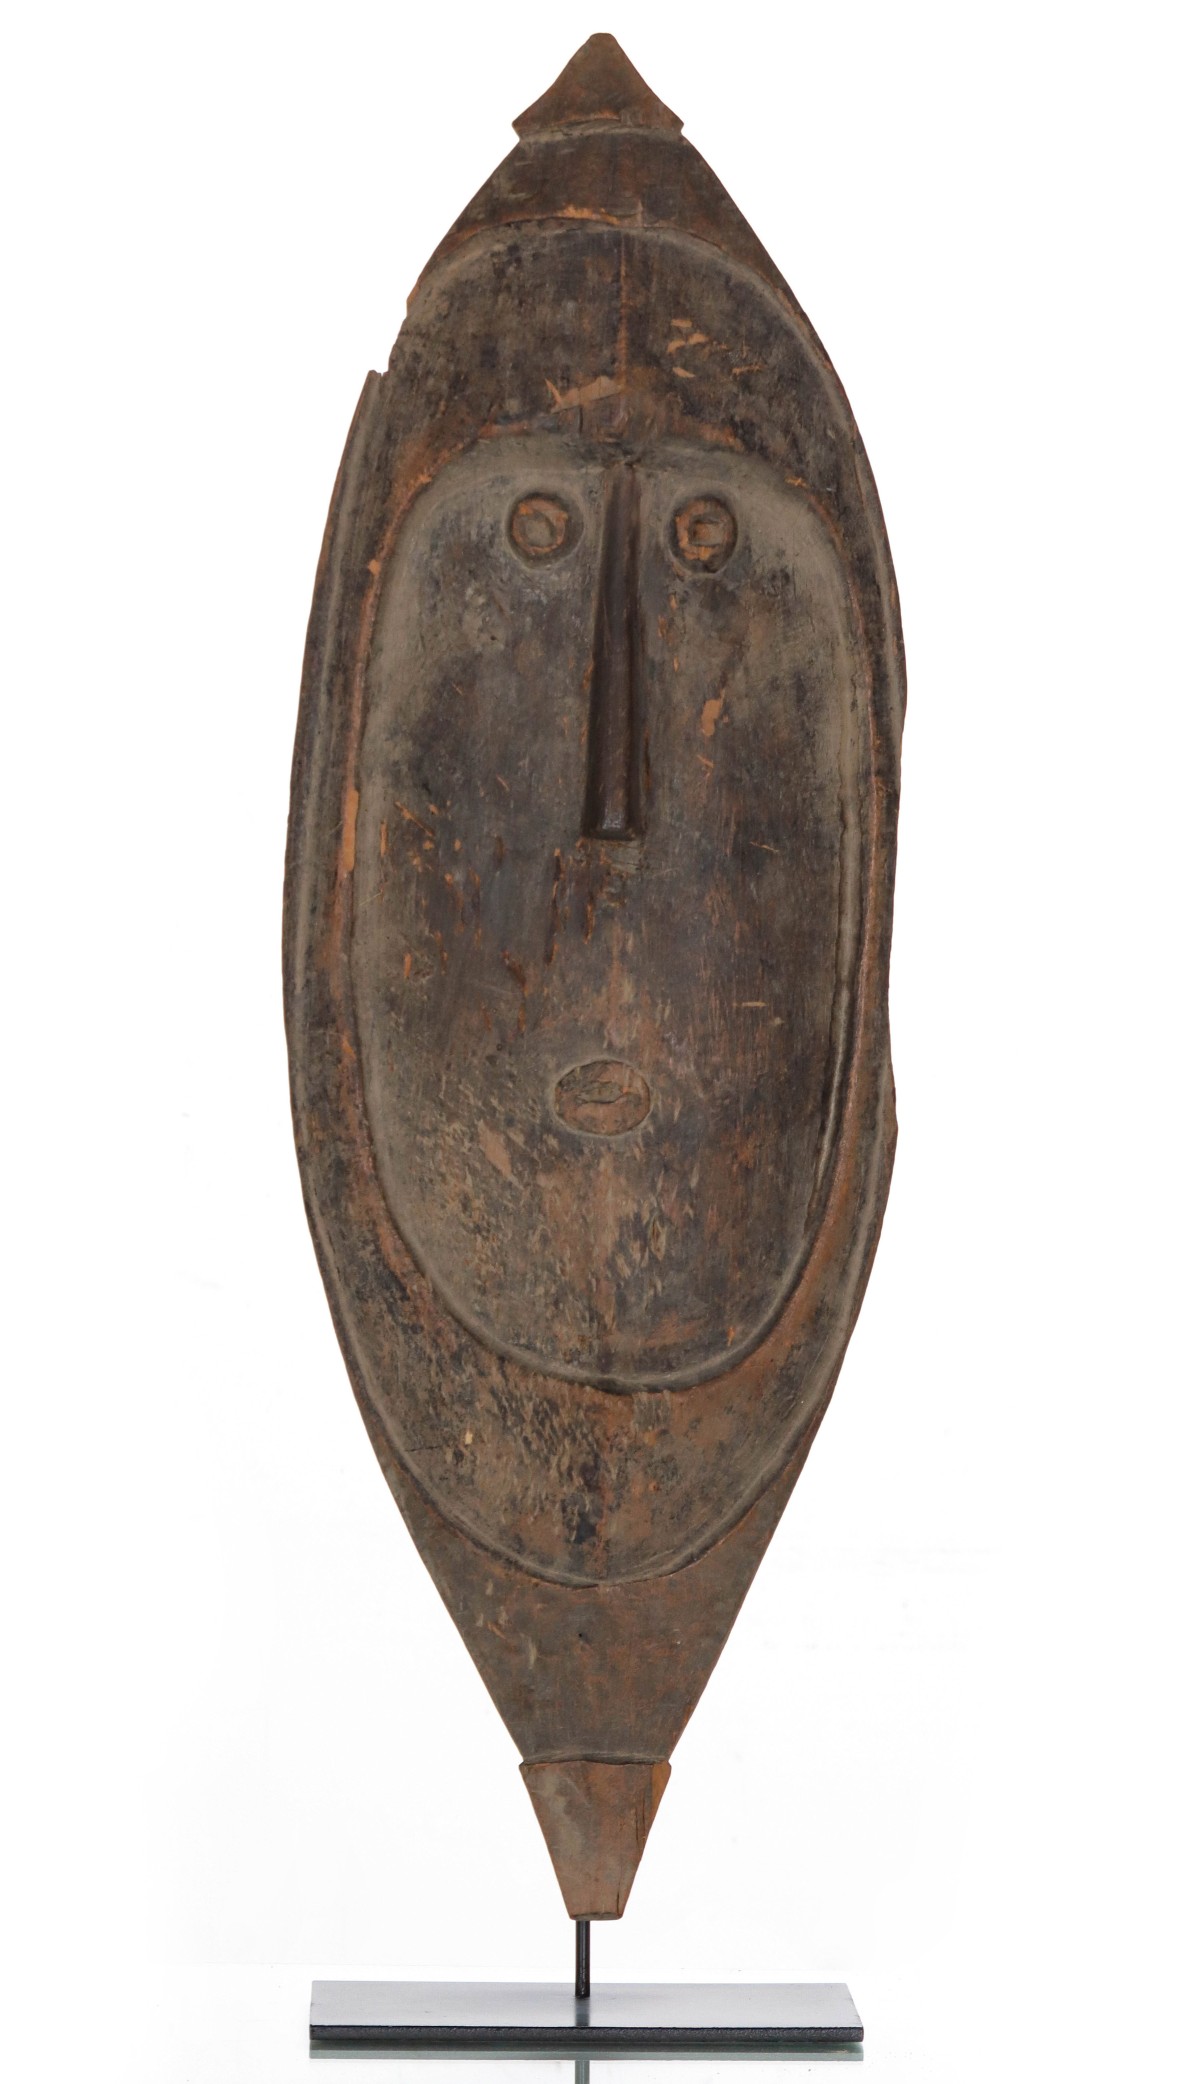 A CARVED WOOD AFRICAN PUPPET MASK ATTR BAMANA PEOPLES